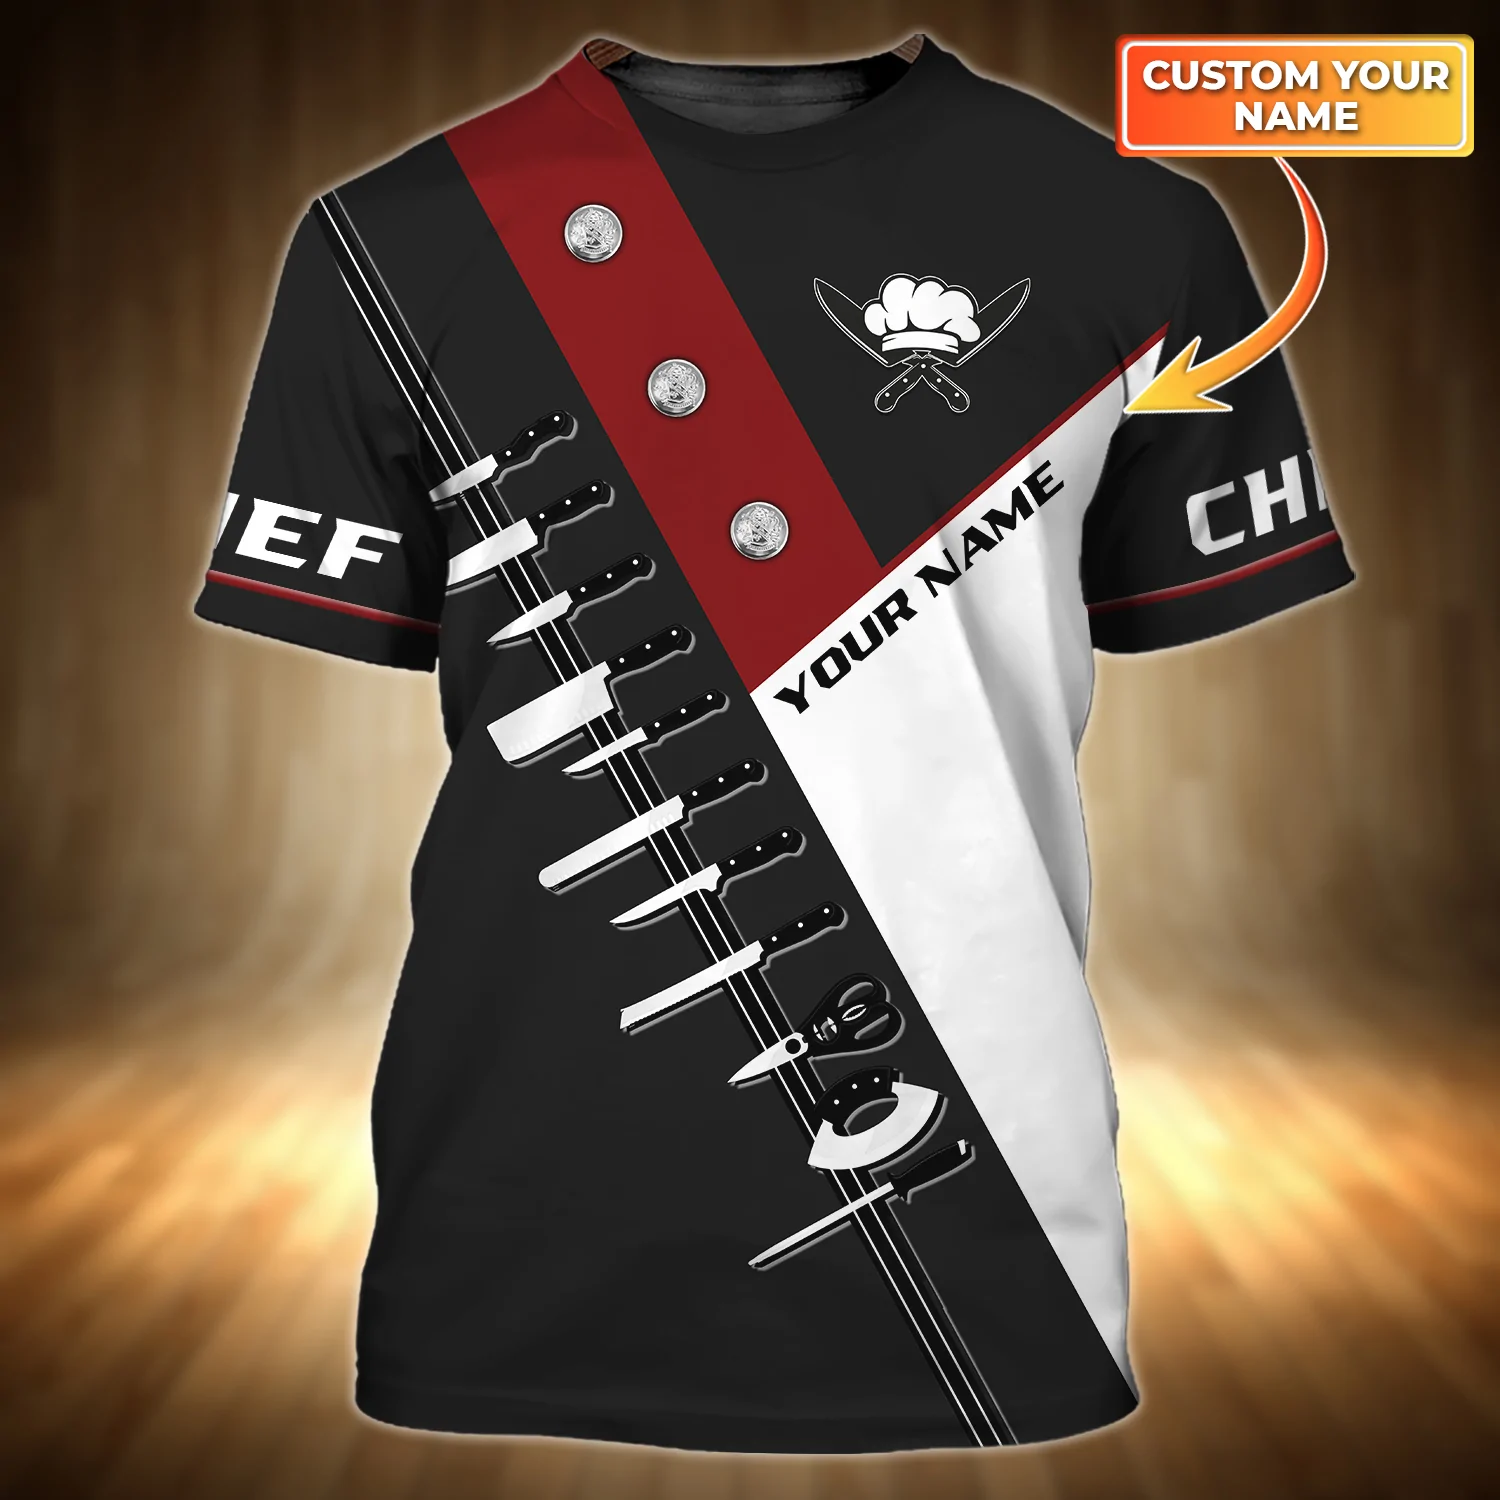 Customized Chef Cook Print On Shirt/ Knife Cooking Equipment 3D All Over Print Chef Shirt/ Unisex Master Chef T Shirt 3D